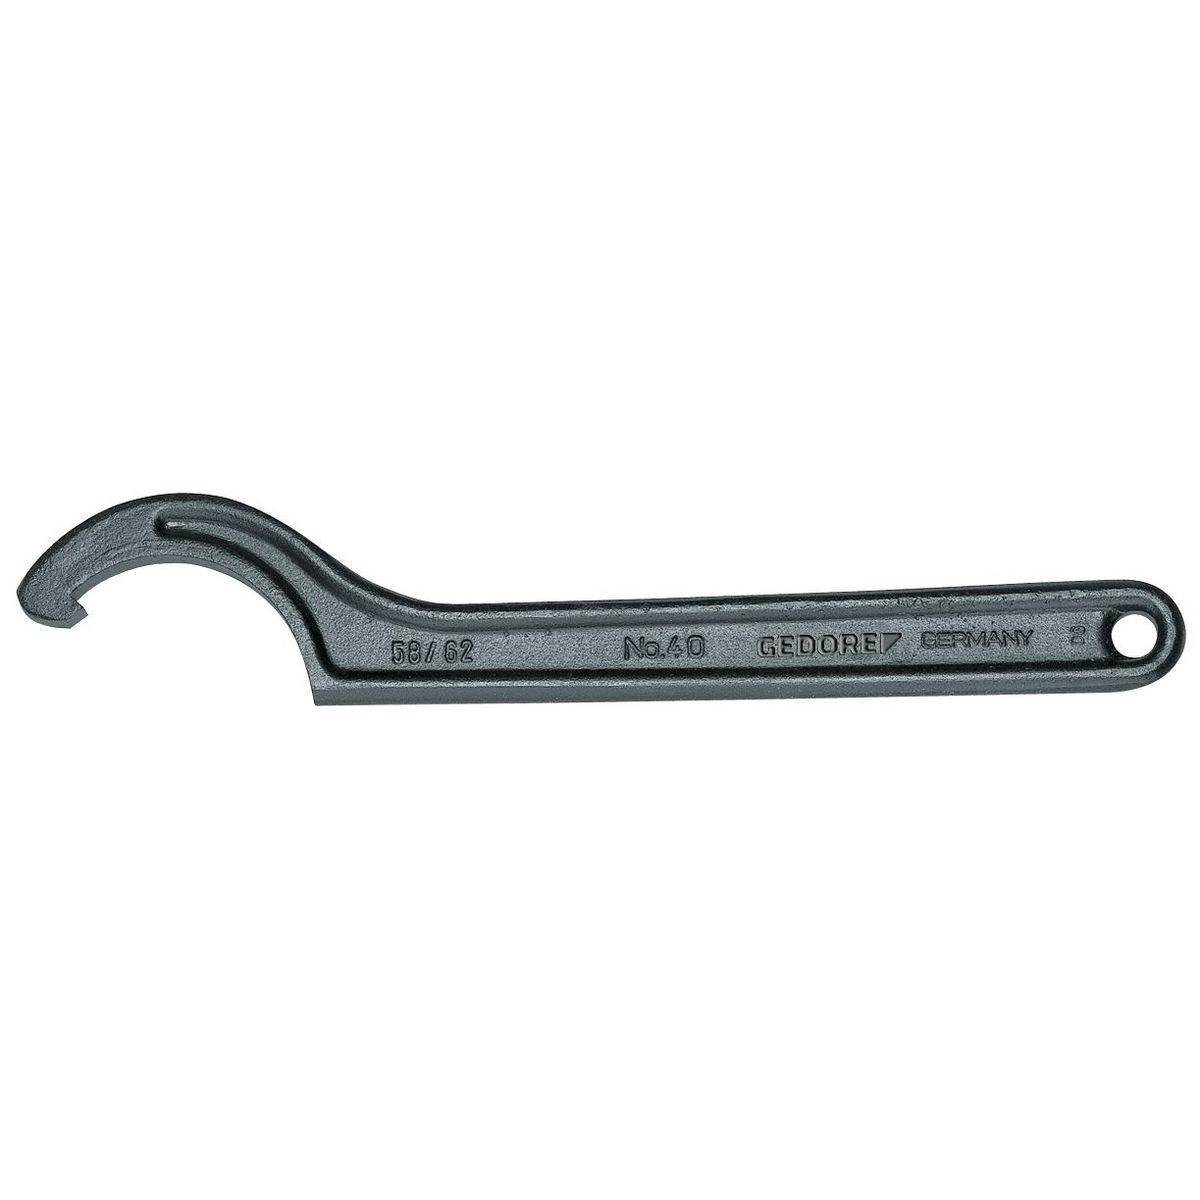 Hook wrench with lug, 40-42mm No.40 40-42 Gedore